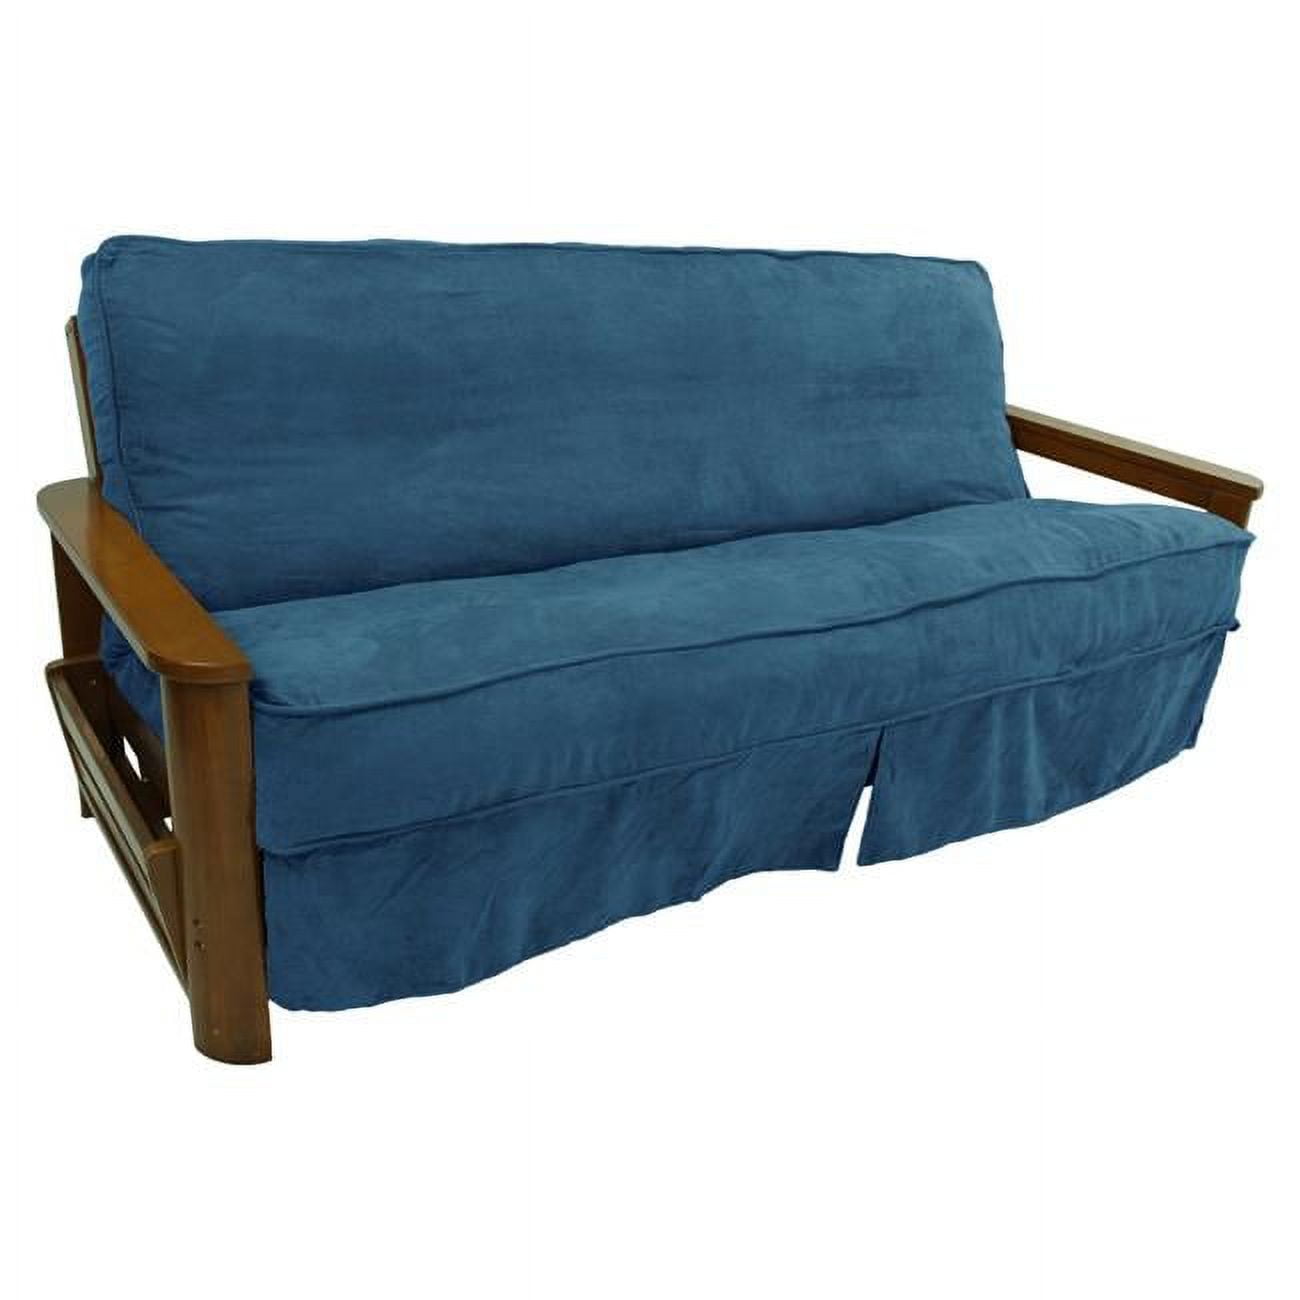 Picture of Blazing Needles 9670-CD-MS-TL 8 to 9 in. Solid Microsuede Double Corded Full Futon Slipcover, Teal